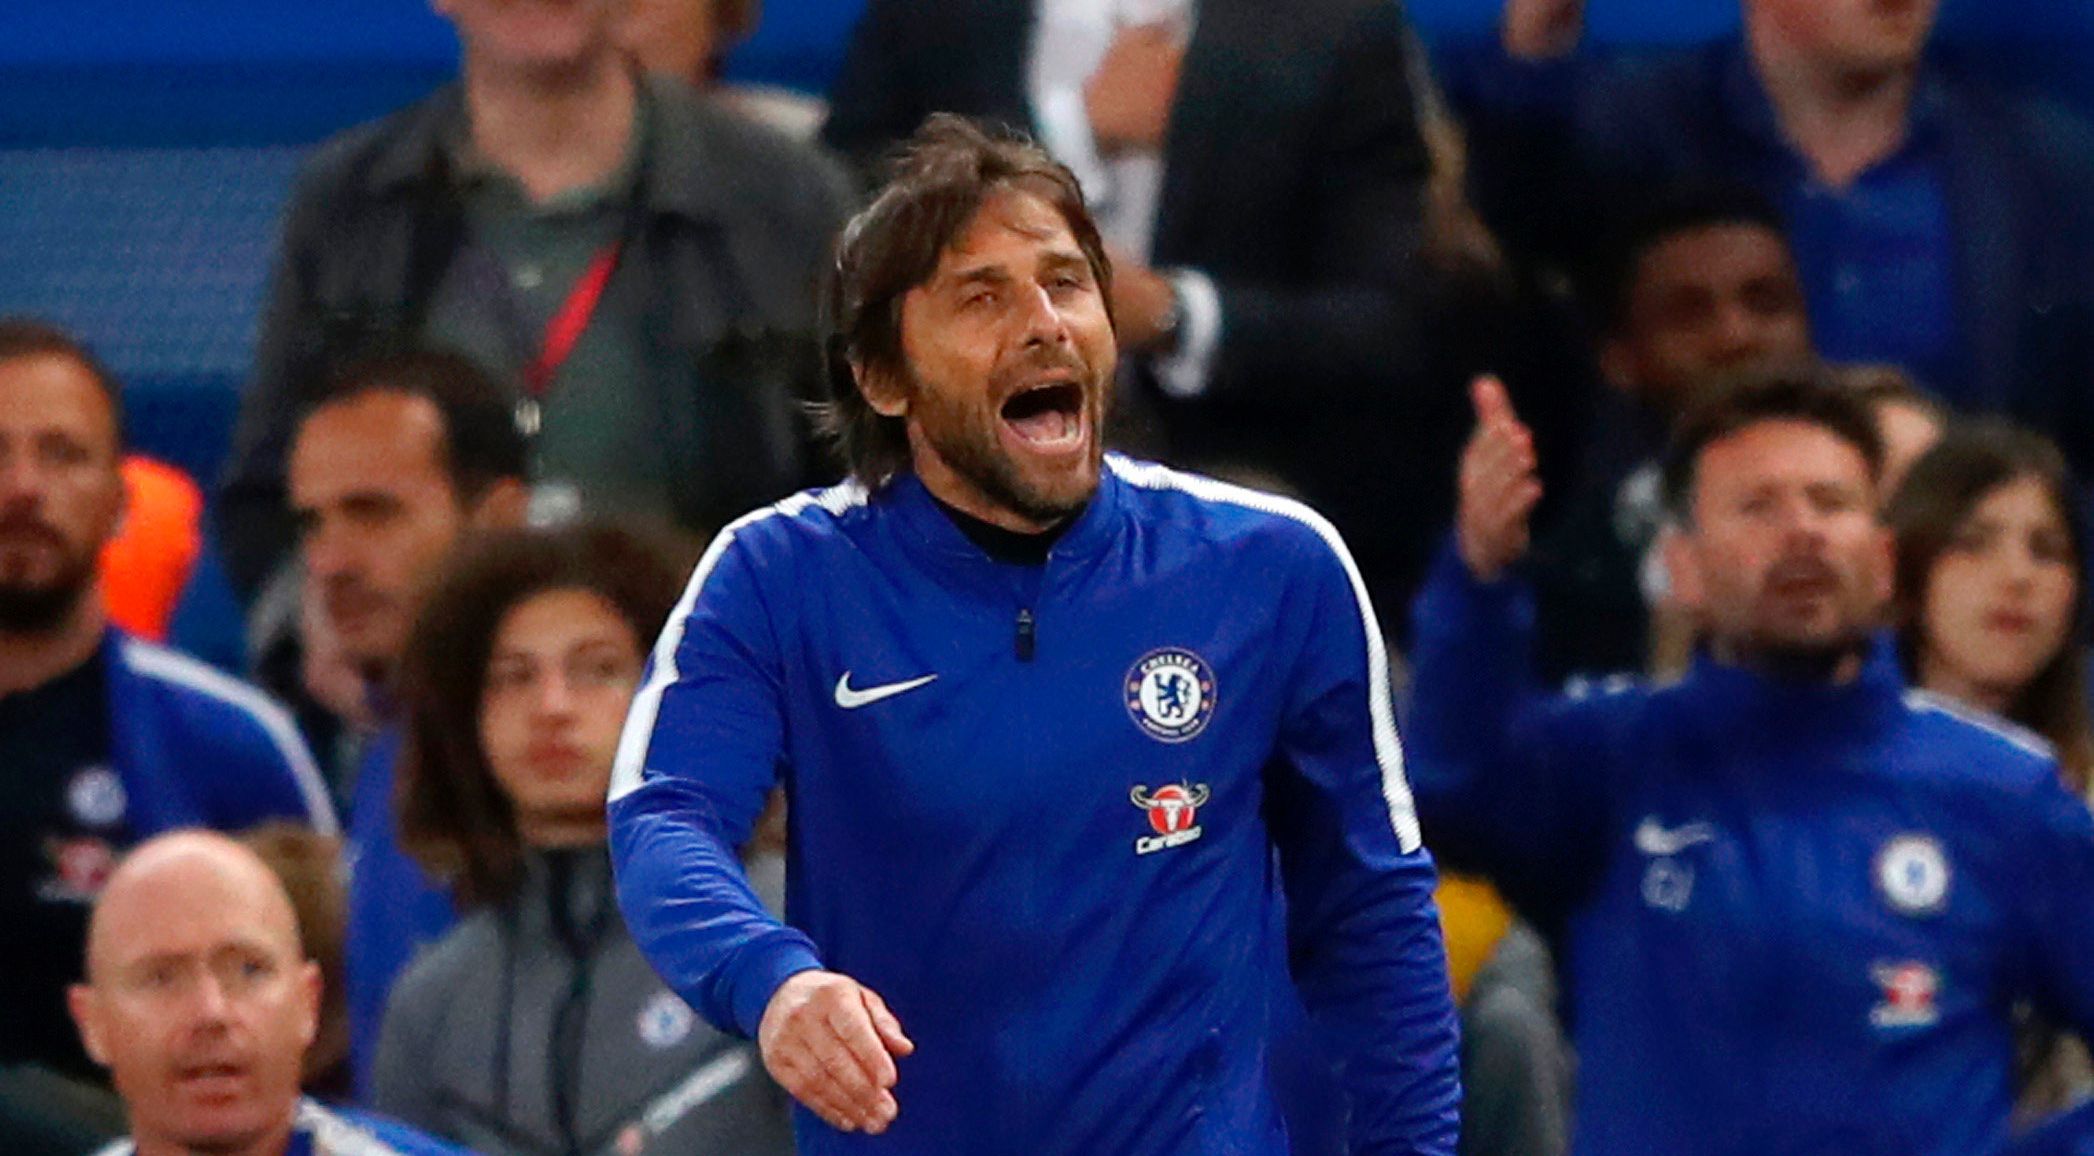 Blues haven't been as bad as year of Mourinho flop: Conte